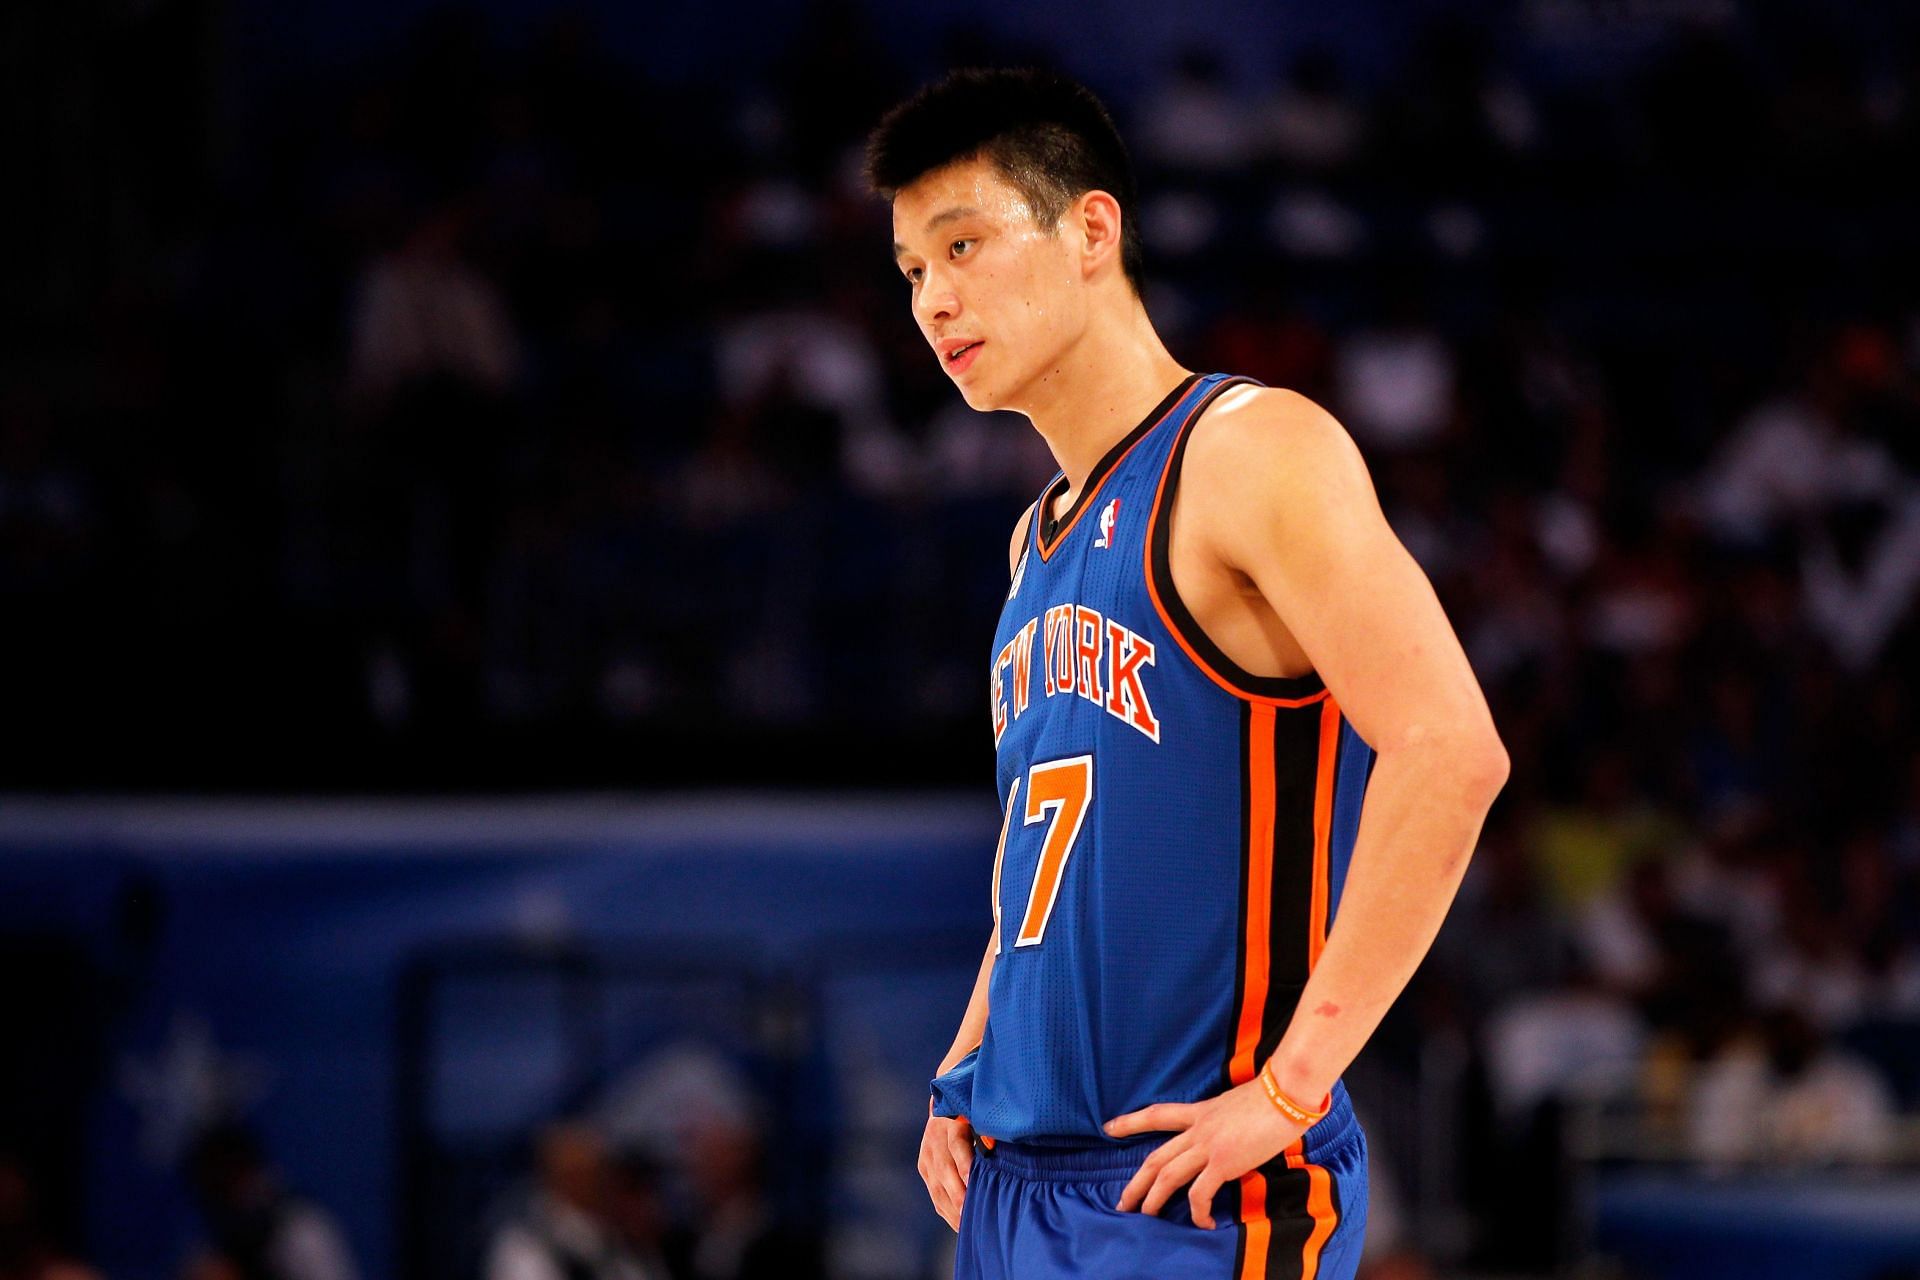 Former NBA star Jeremy Lin says he isn't ready to retire just yet